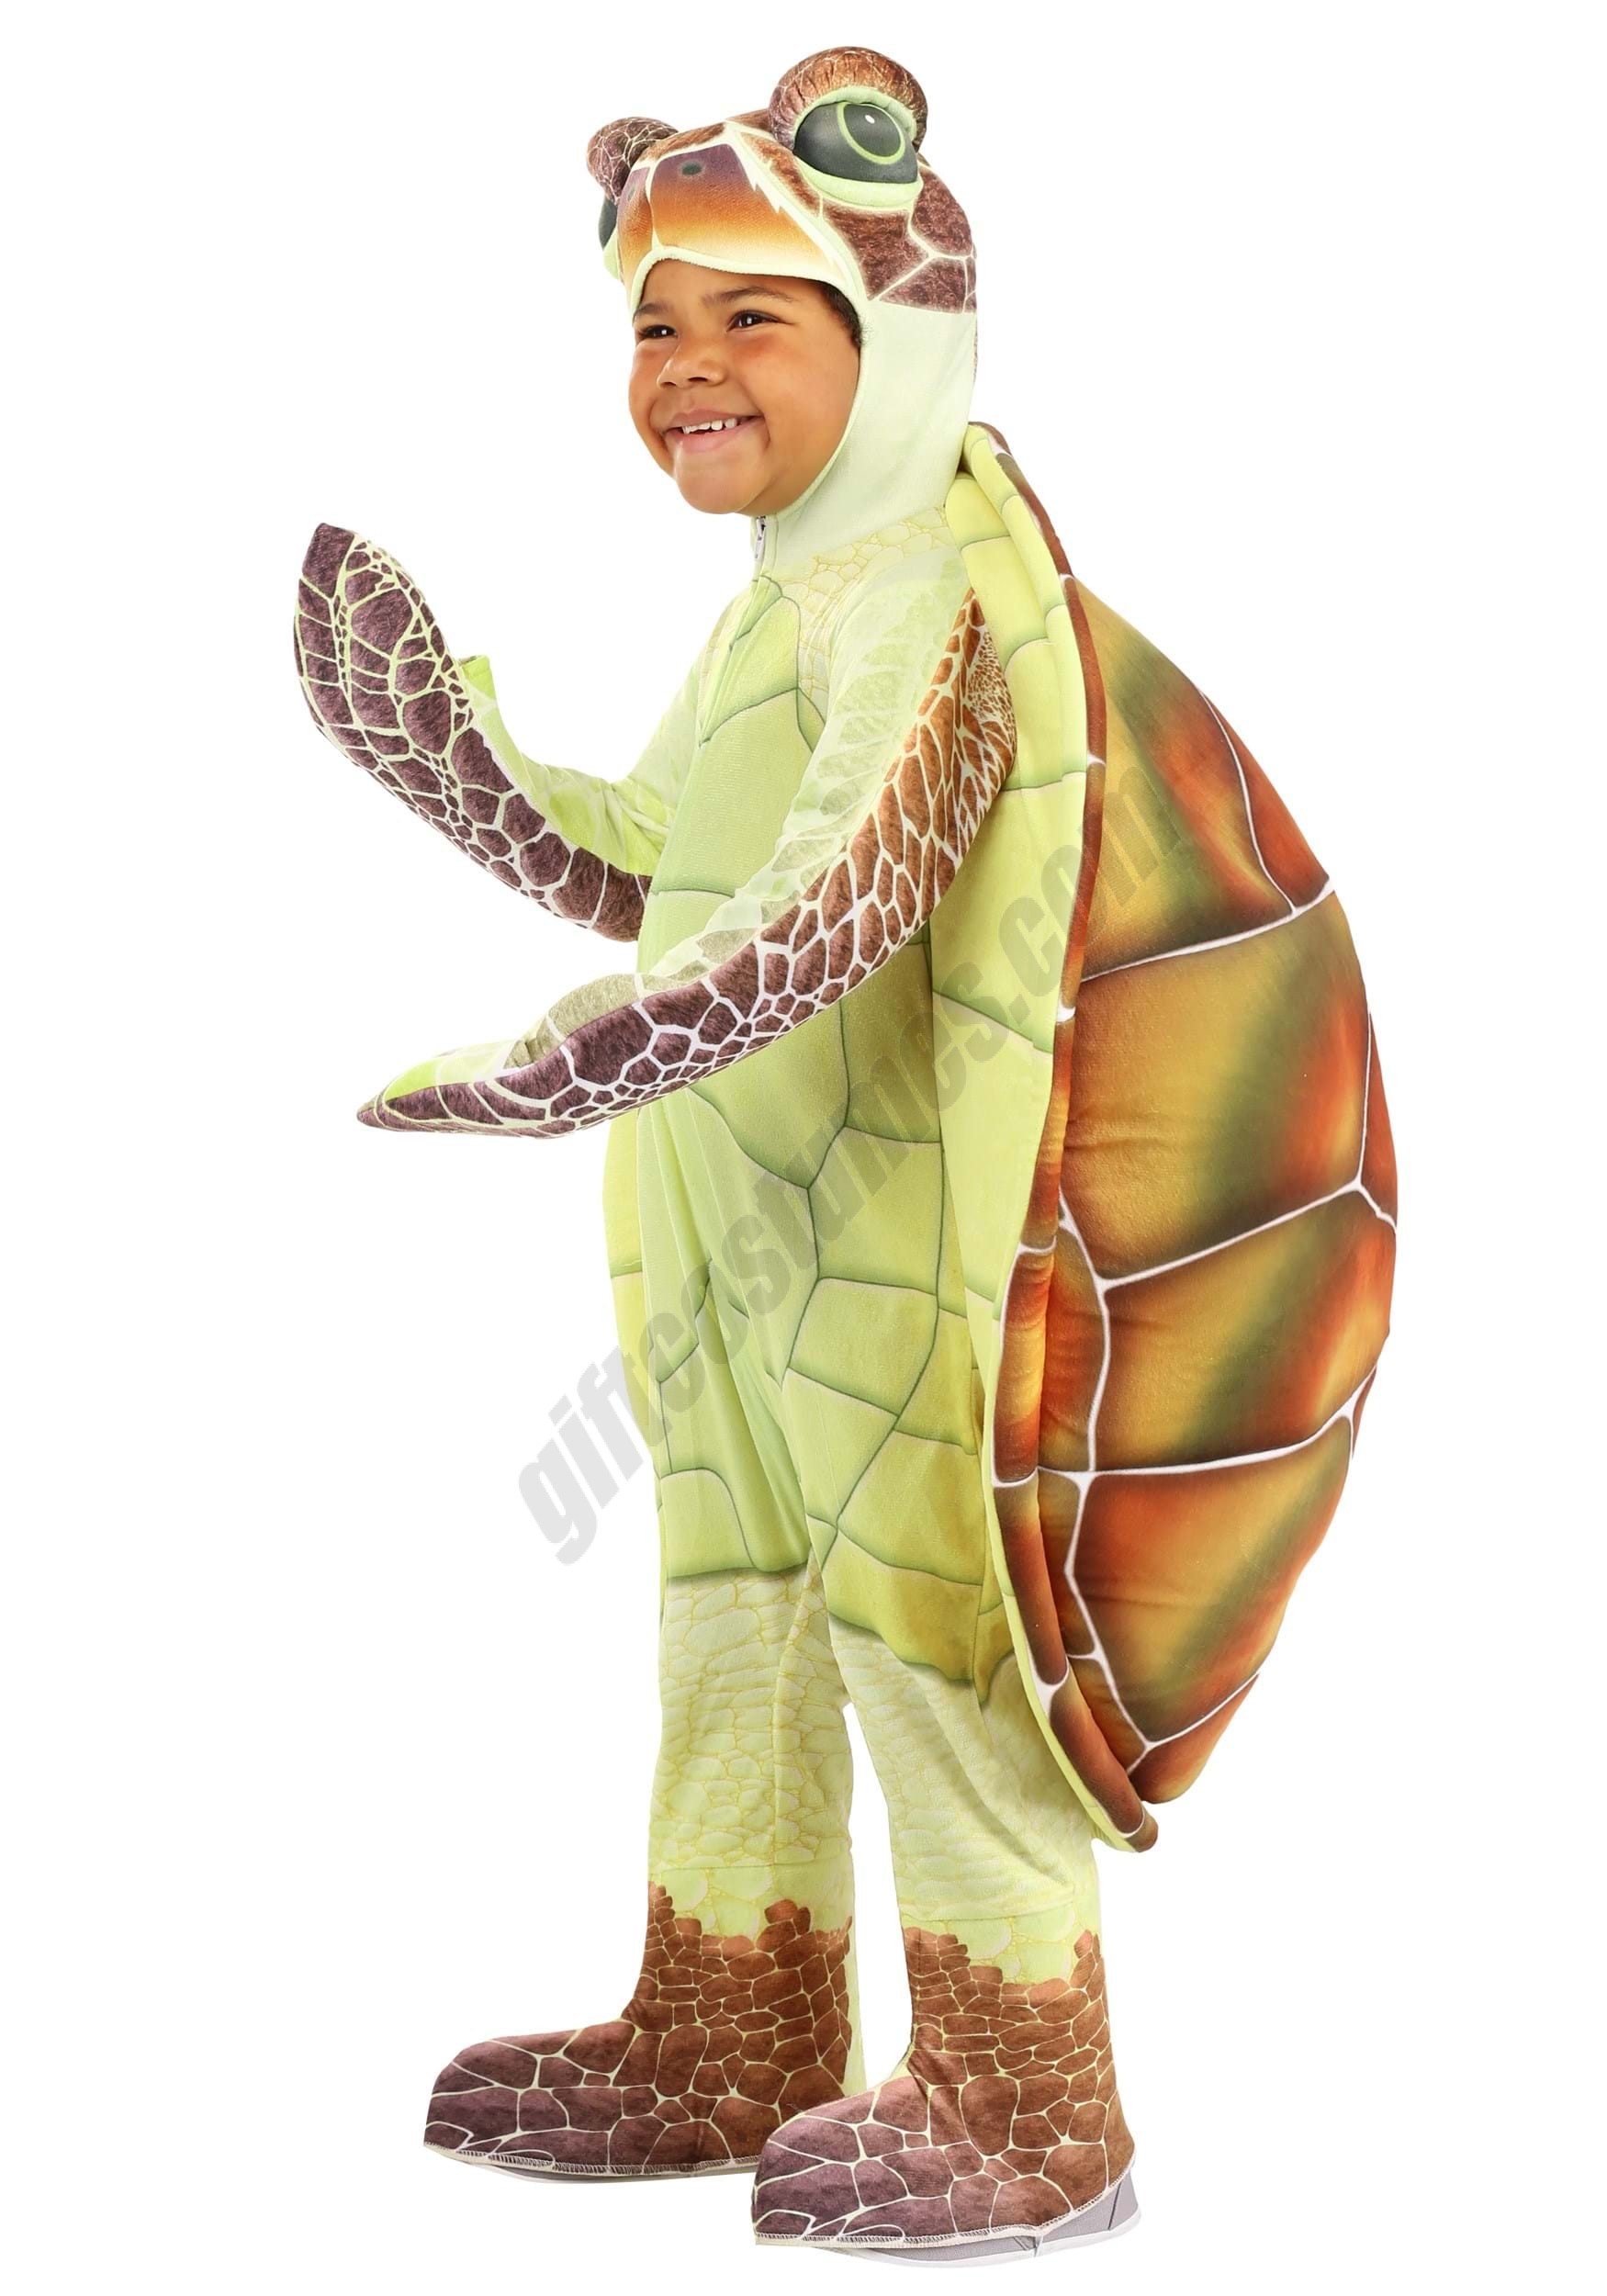 Sea Turtle Costume for Toddlers Promotions - Sea Turtle Costume for Toddlers Promotions